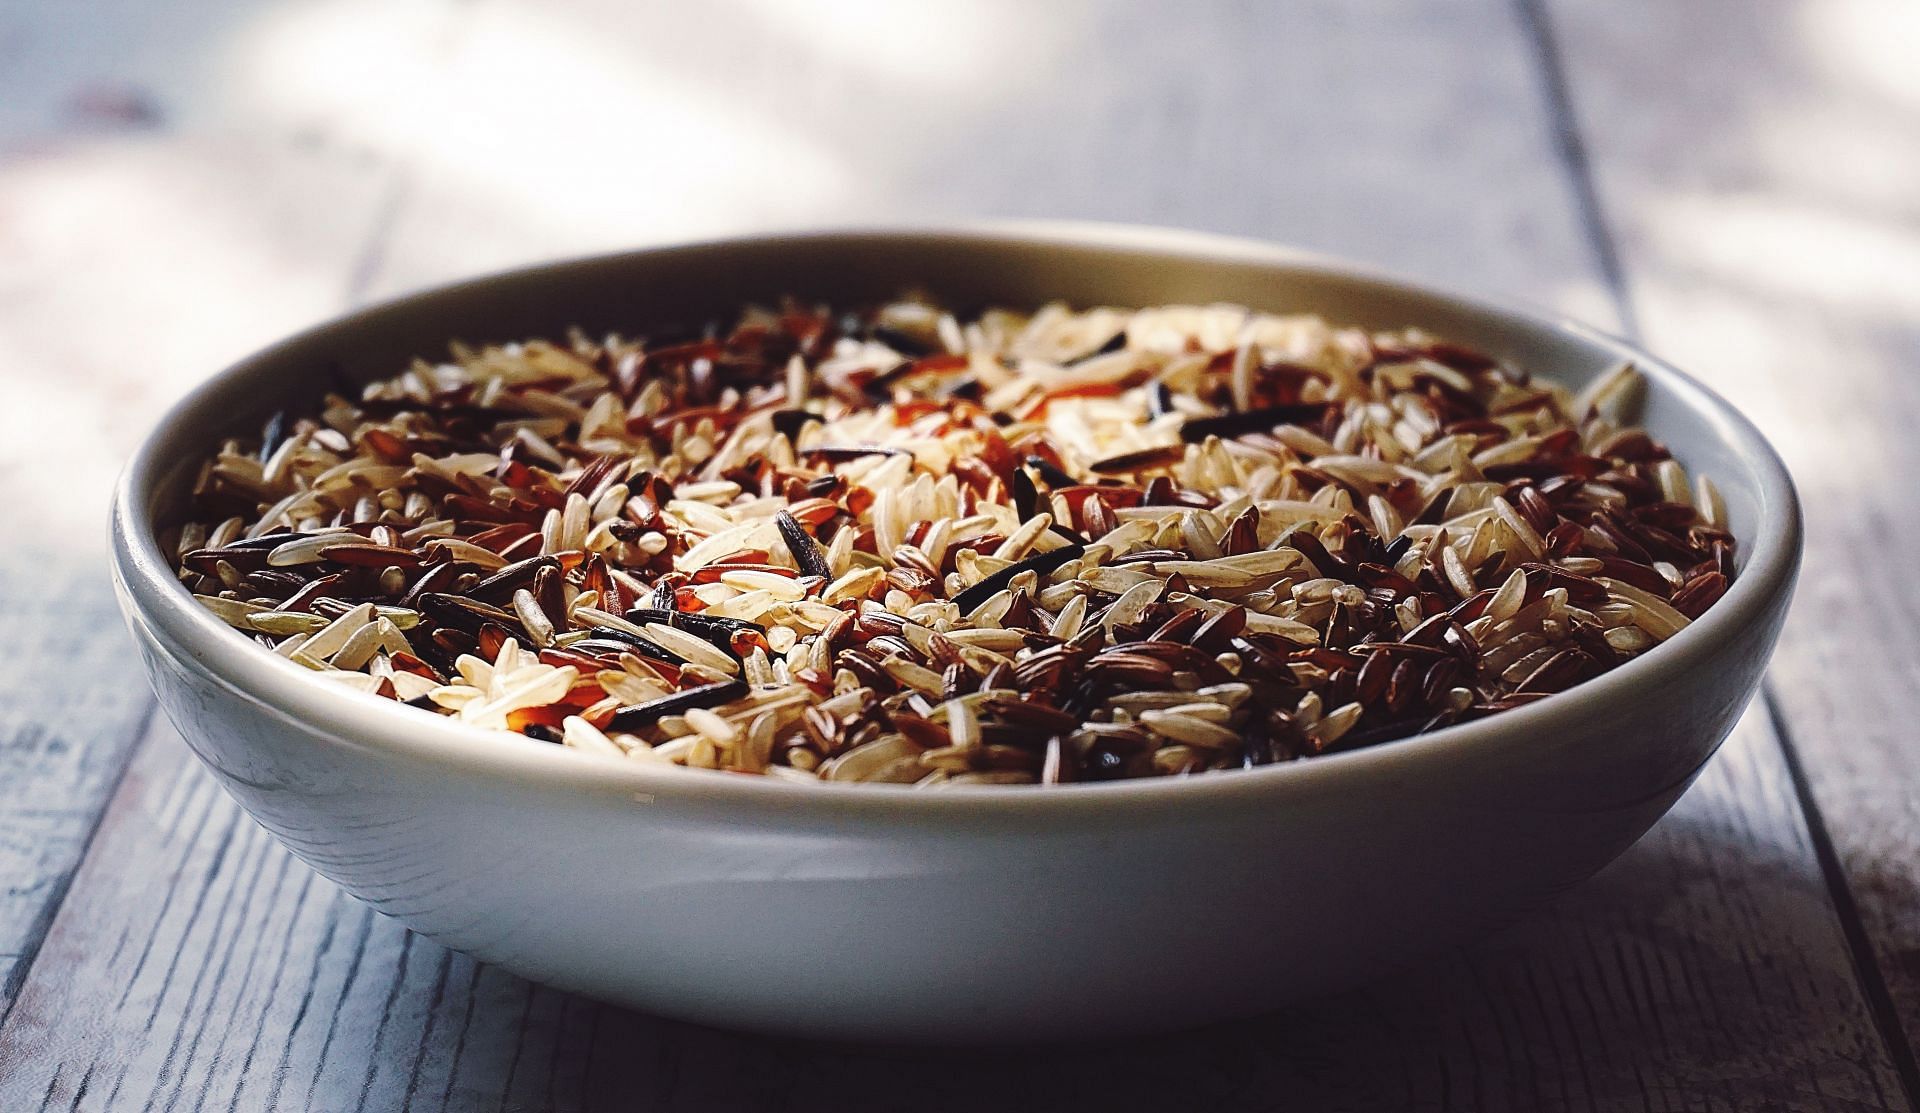 Brown rice is a great source of thiamin. (Image via Pexels)